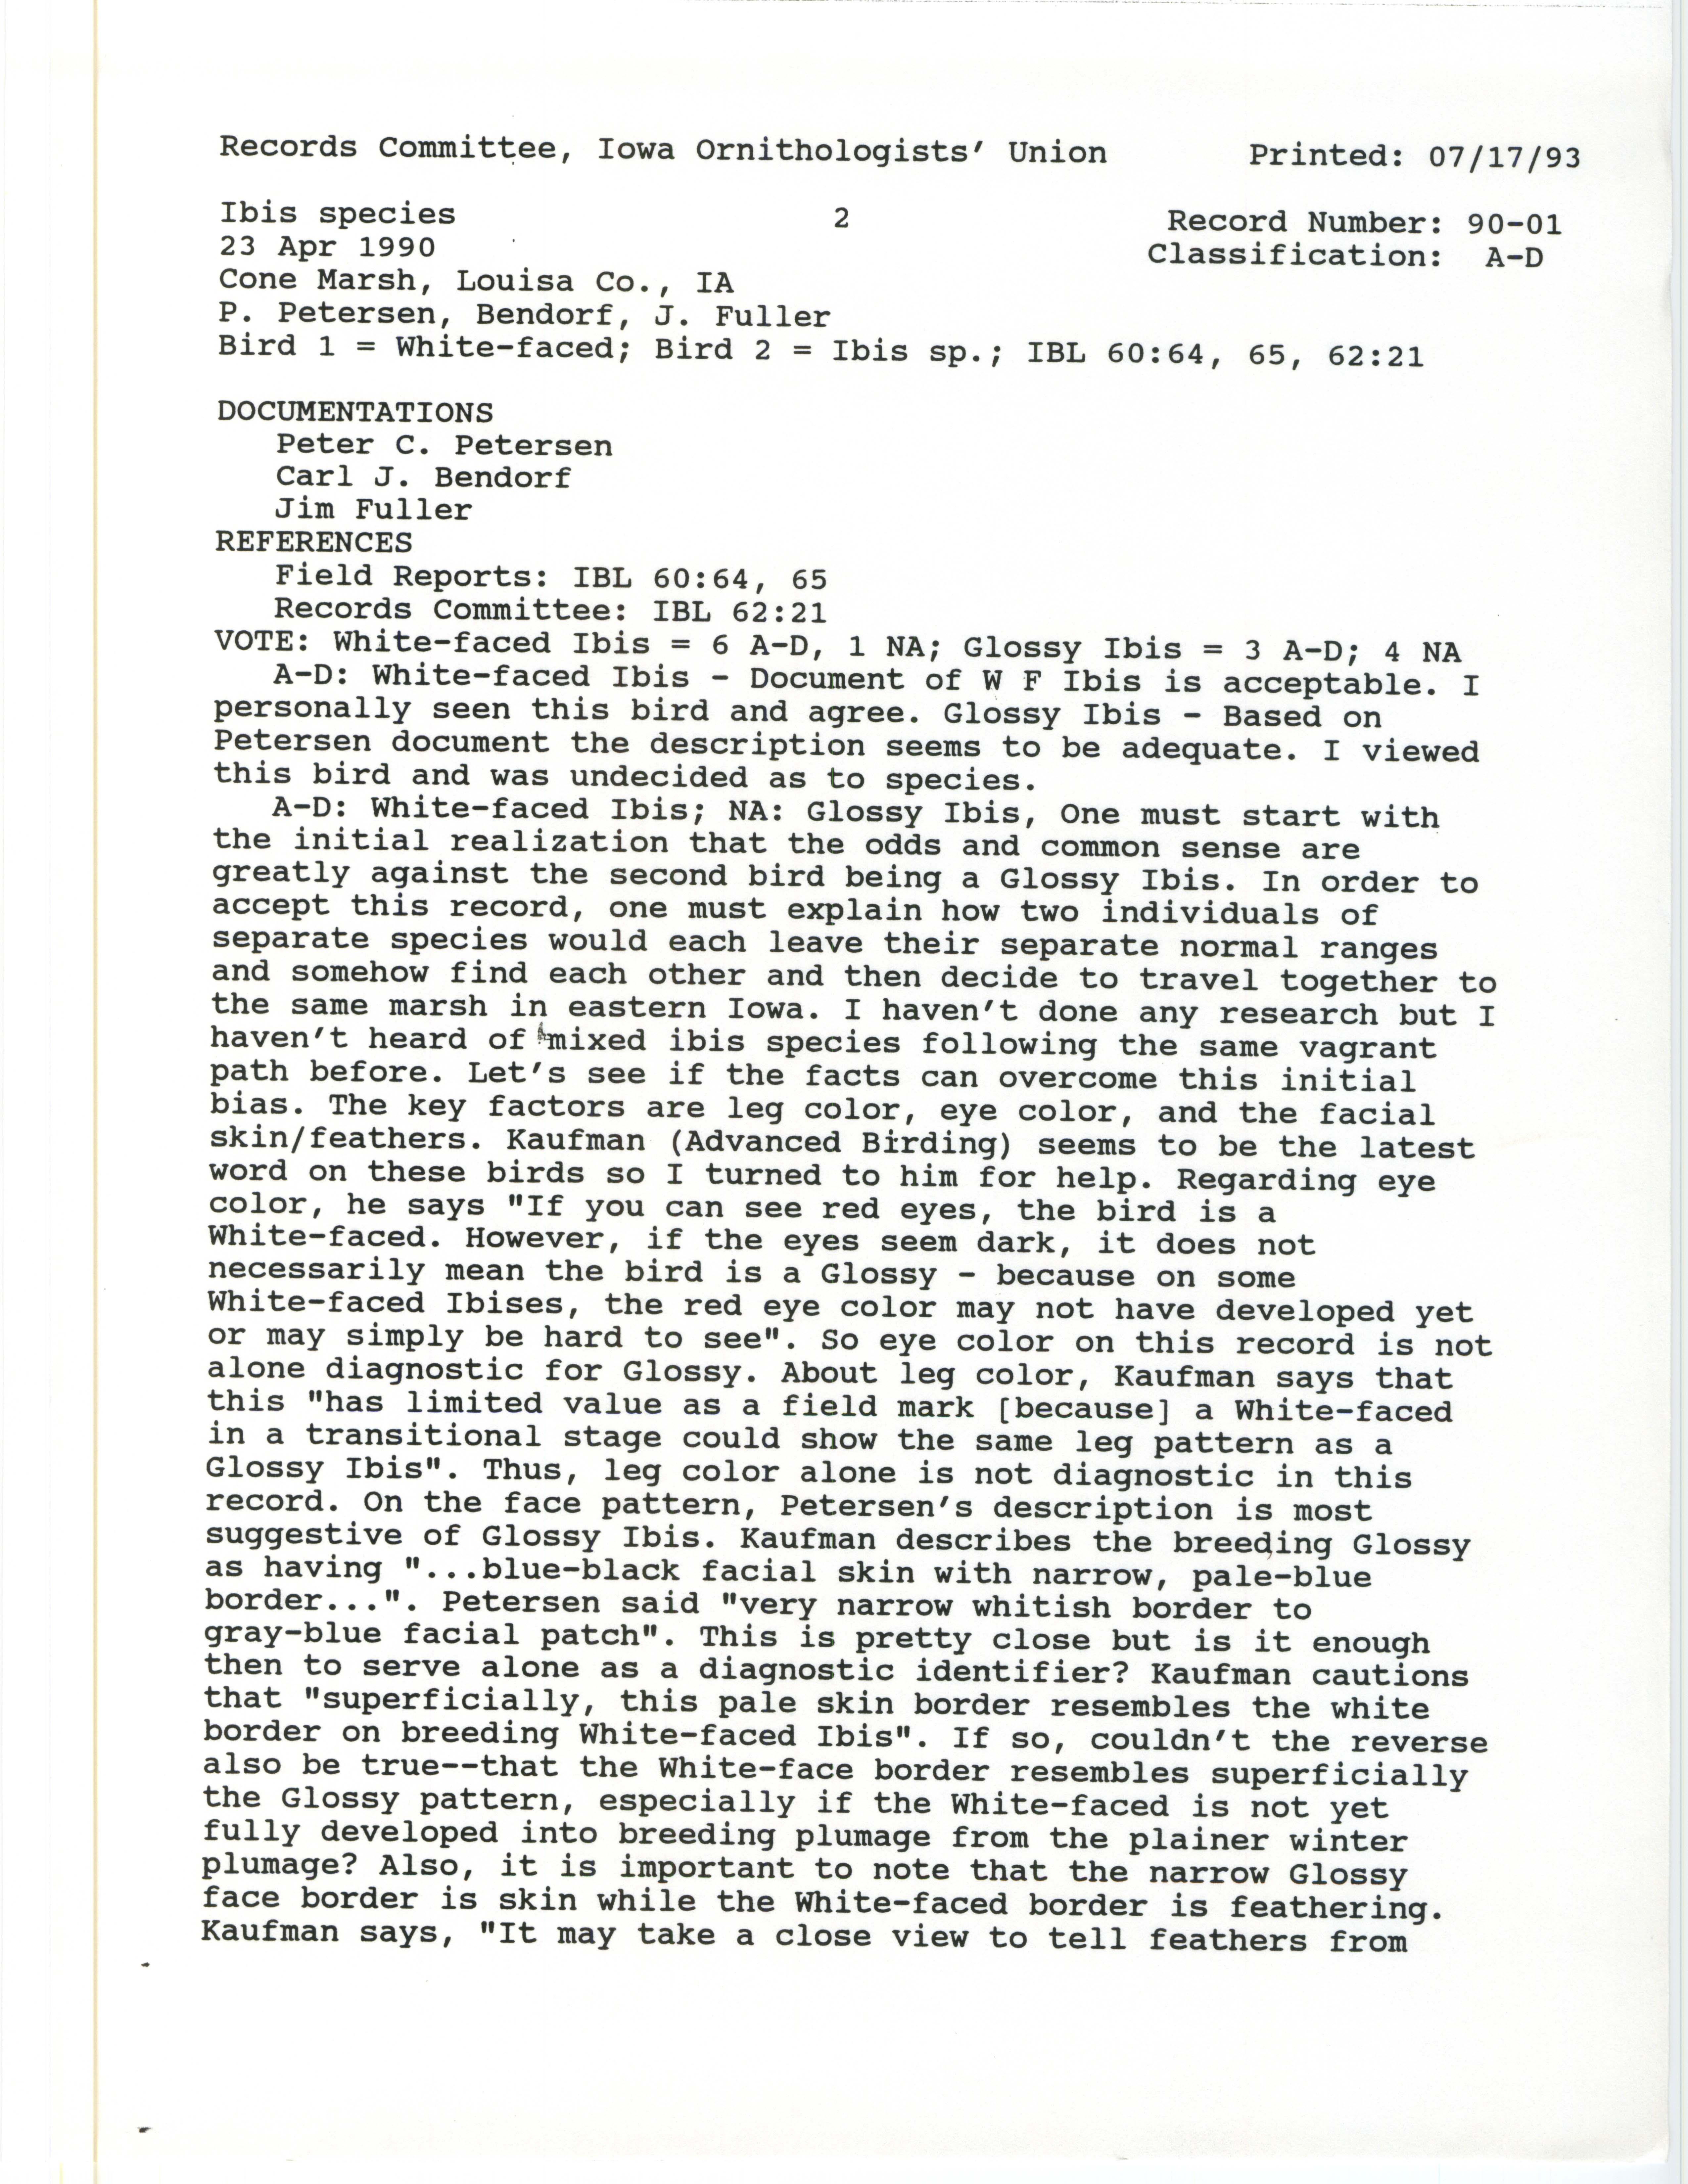 Records Committee review for rare bird sighting of Ibis Species at Cone Marsh, 1990